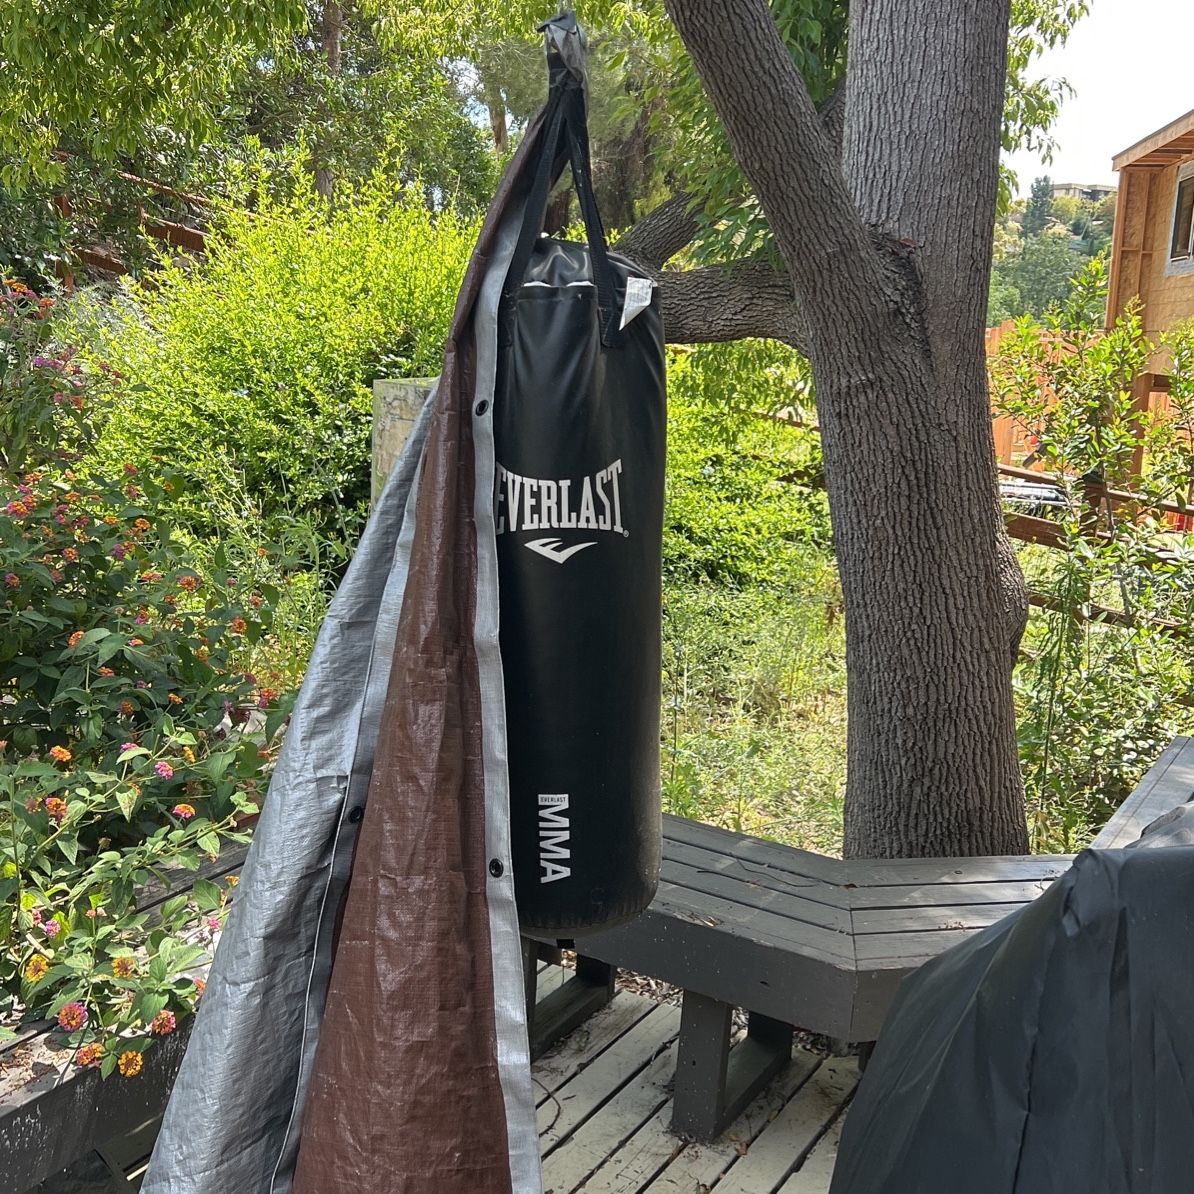 200 Pound Prolast Punching Bag Set For Sale In Los Angeles,, 53% OFF